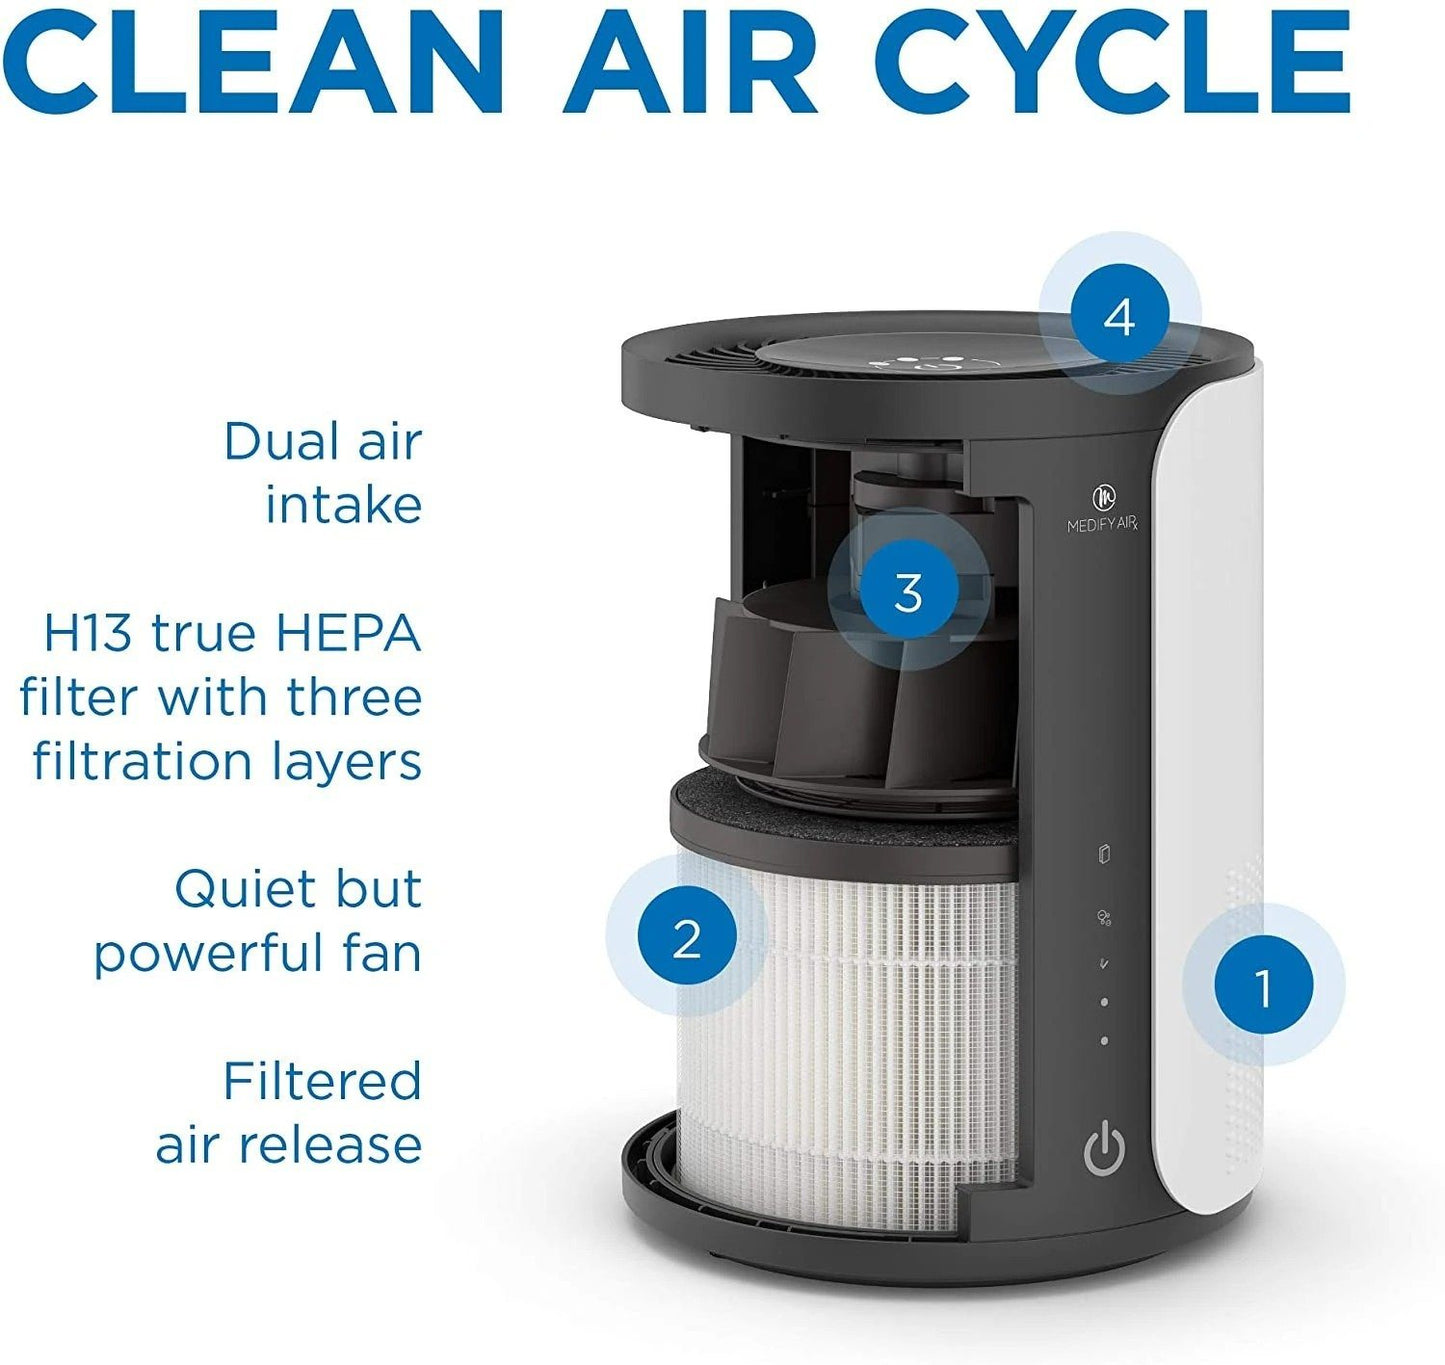 medify ma-18 air purifier with h13 hepa filter - a higher grade of hepa for 400 sq. ft. (99.9%)